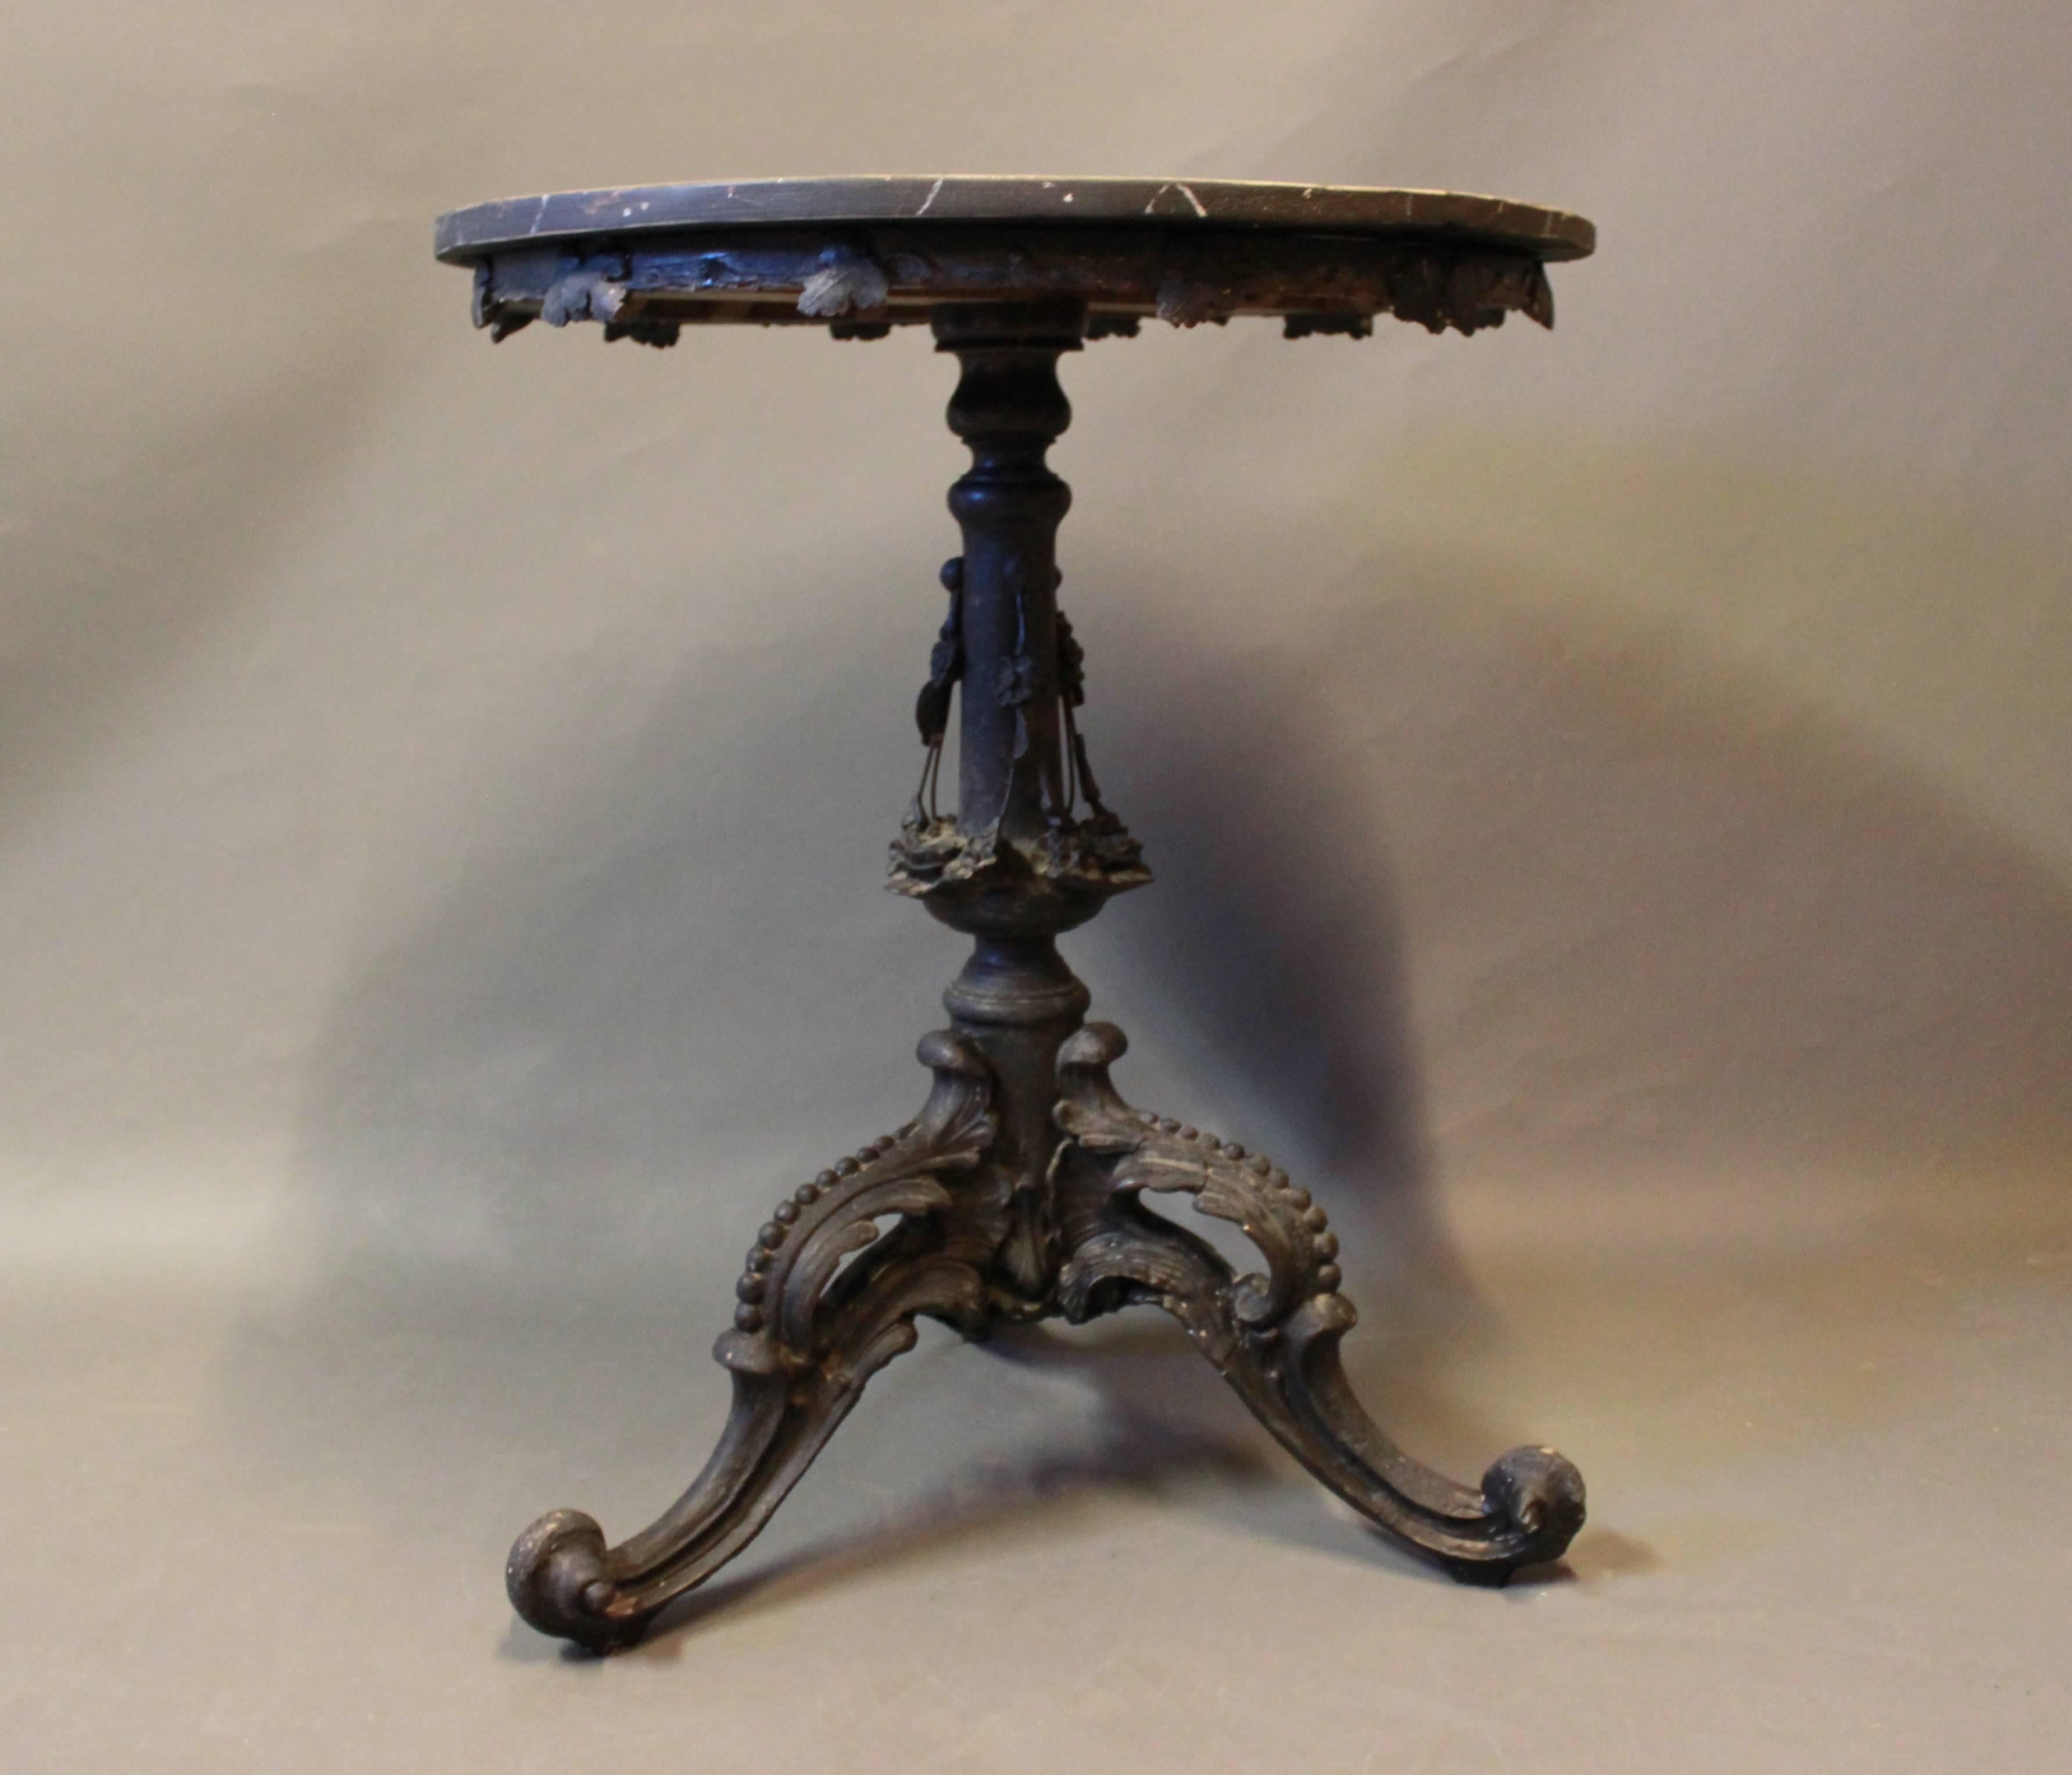 Round side-/lamptable with black marbled tabletop in the style of Gustavian from around the year 1880.